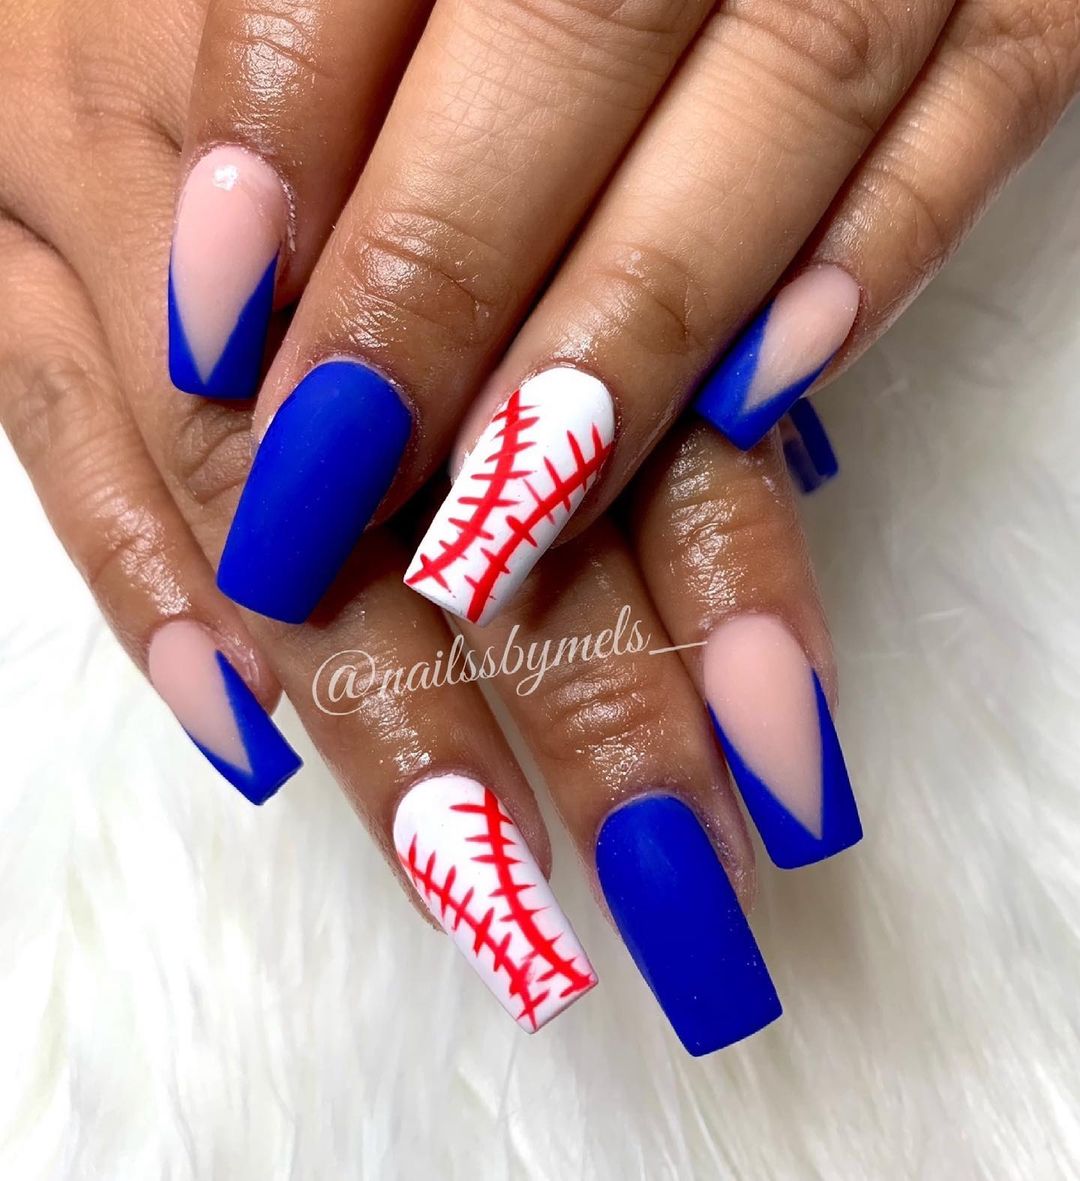 Long Square Nails With Matte Blue V-French Tip And White Basebal Stich Accent